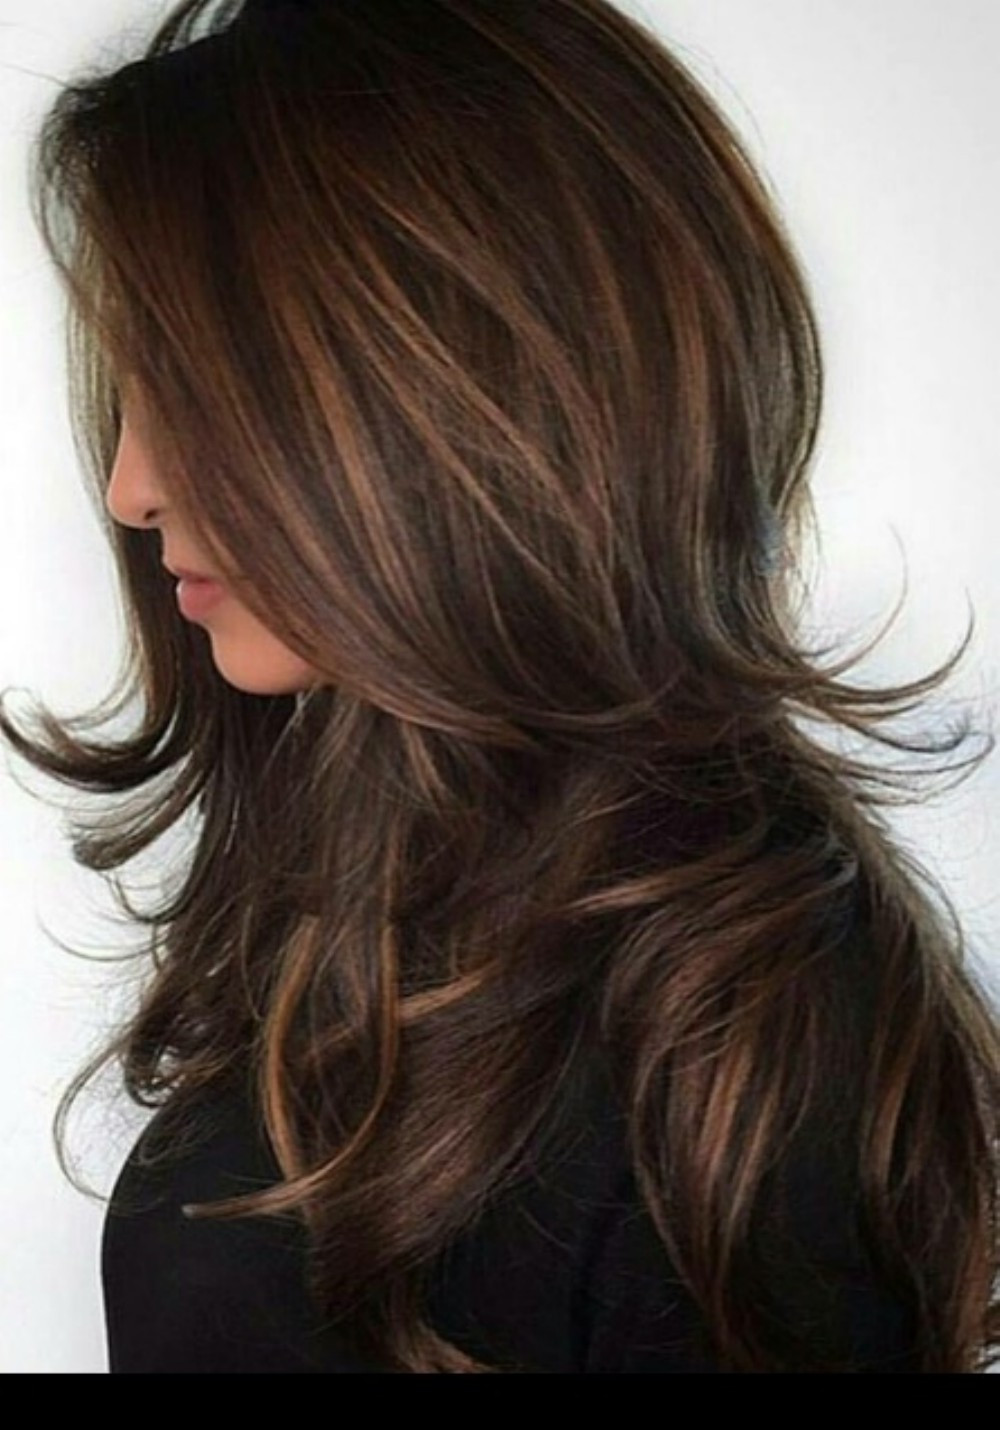 Lots More Female Hairstyles
 Best Layered Hairstyles for Women You Can Try This Year